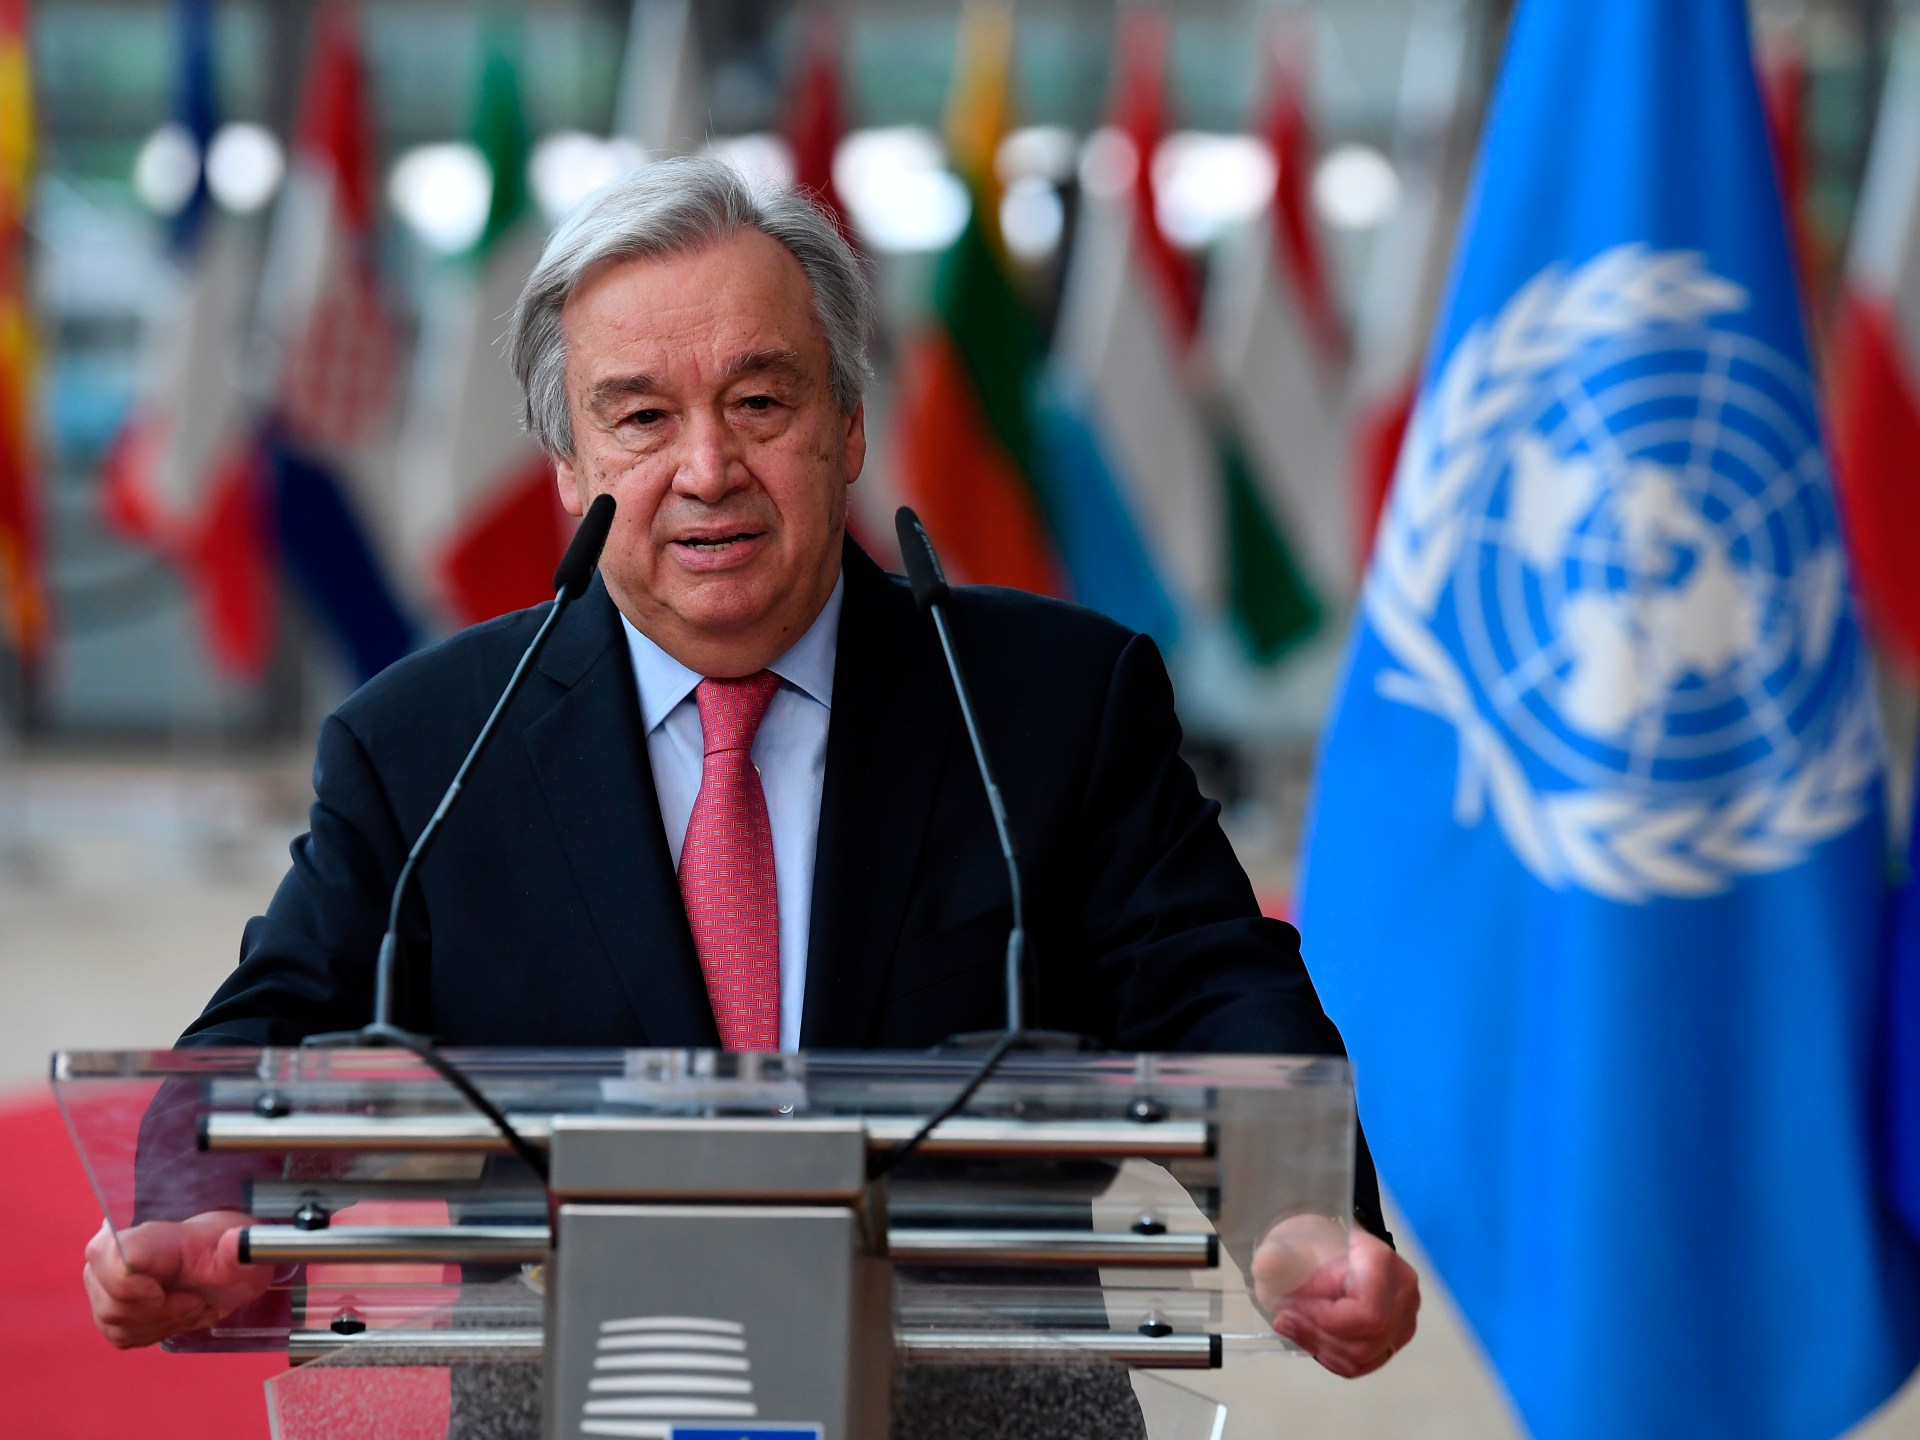 ‘Crimes against humanity’ may have been committed in Sudan, says UN chief